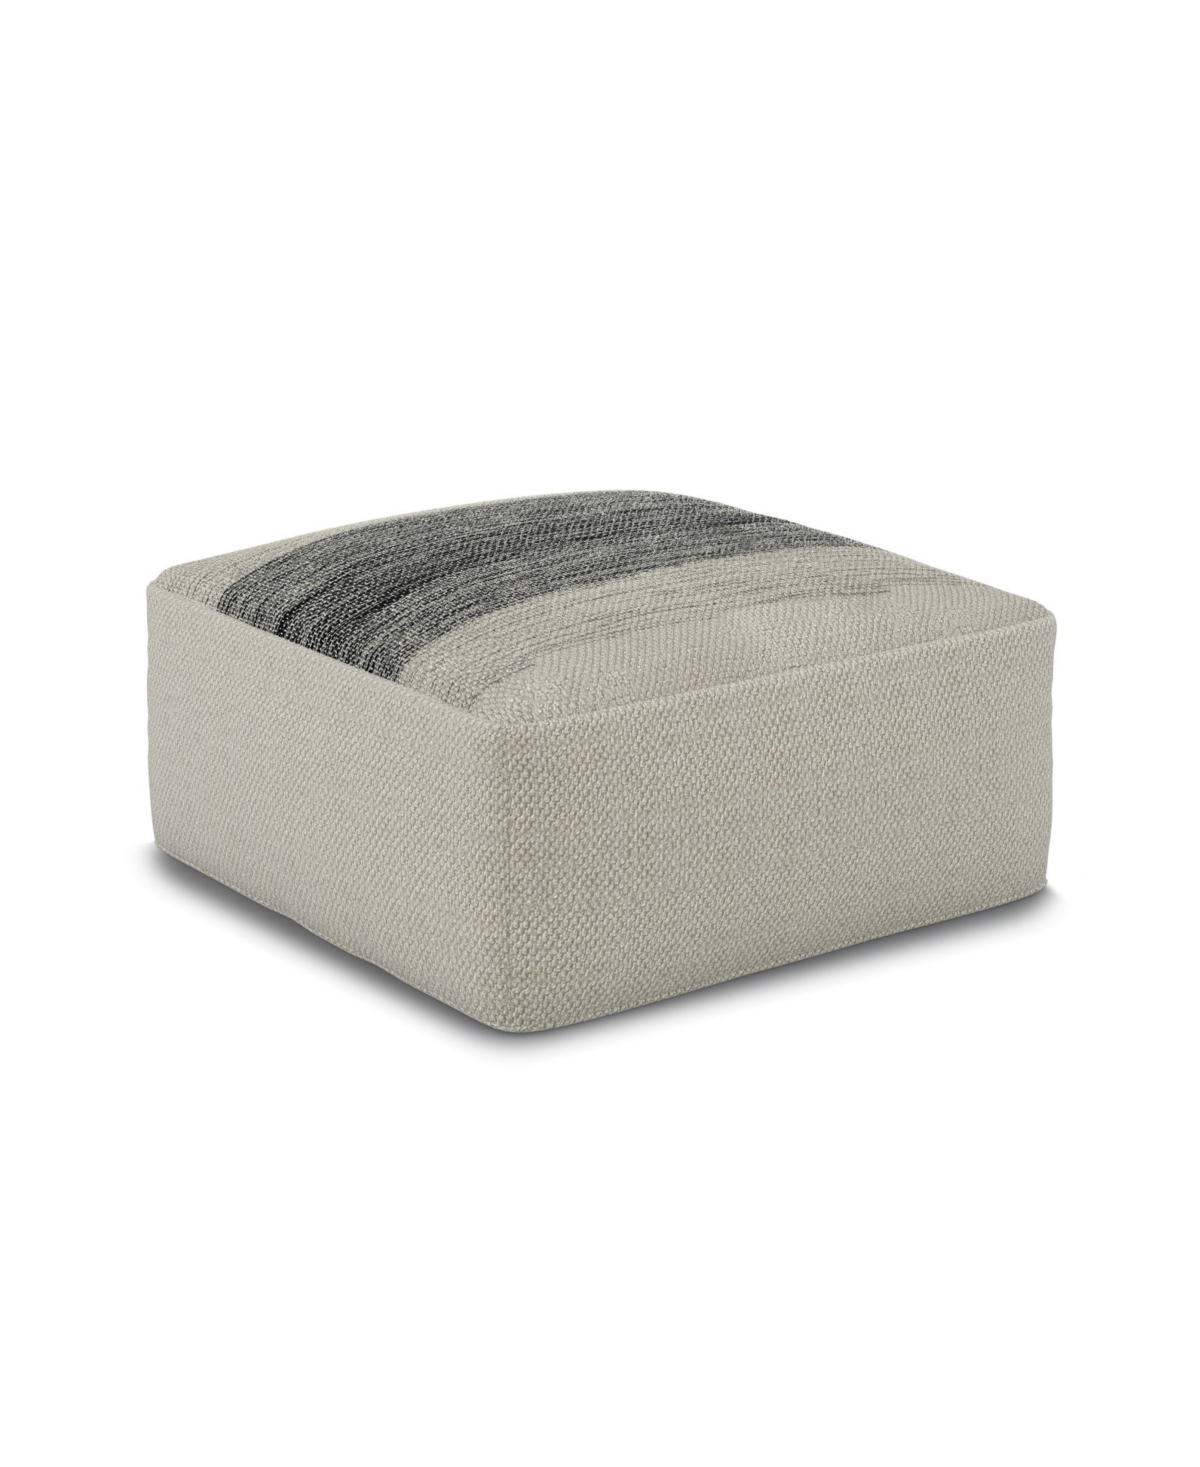 Macy's Sabella Square Woven Outdoor And Indoor Pouf In Gray And White